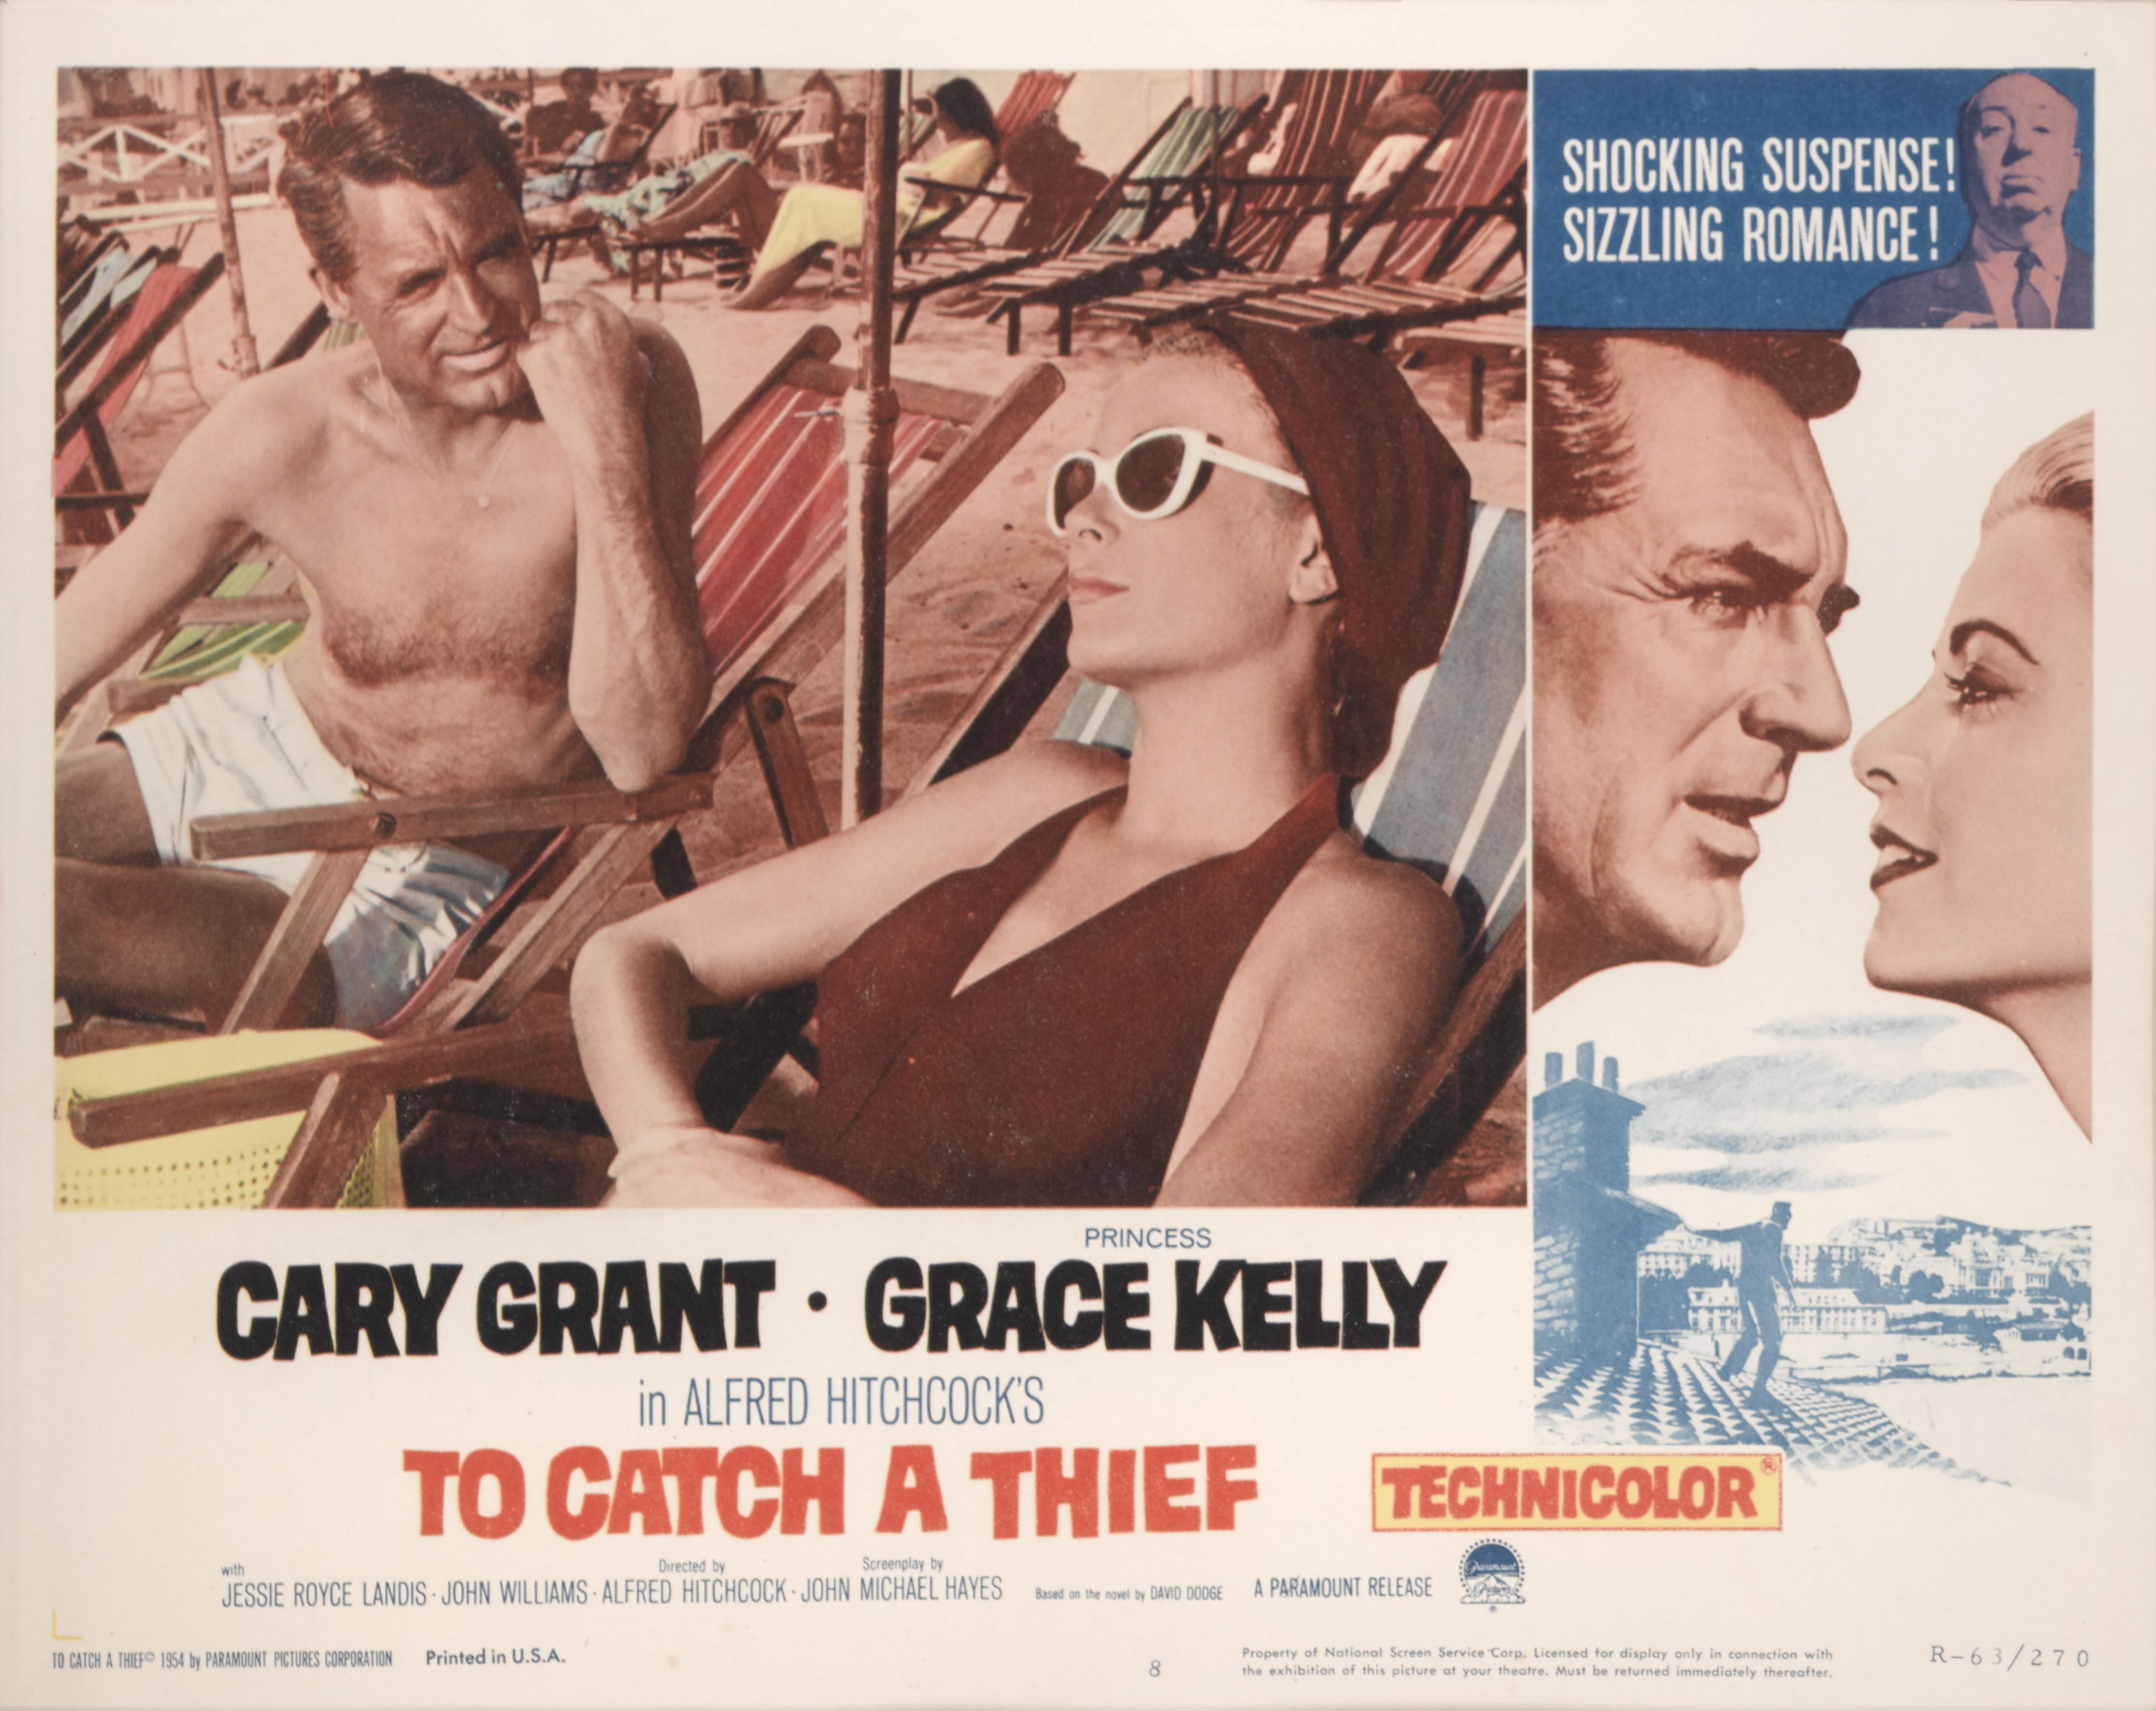 Original US lobby card for the classic 1955 Alfred Hitchcock thriller To Catch a Thief. This Lobby card was created for the films re-release in 1963 and the art work on it is unique to this release of the film.
This film starred Cary Grant and Grace